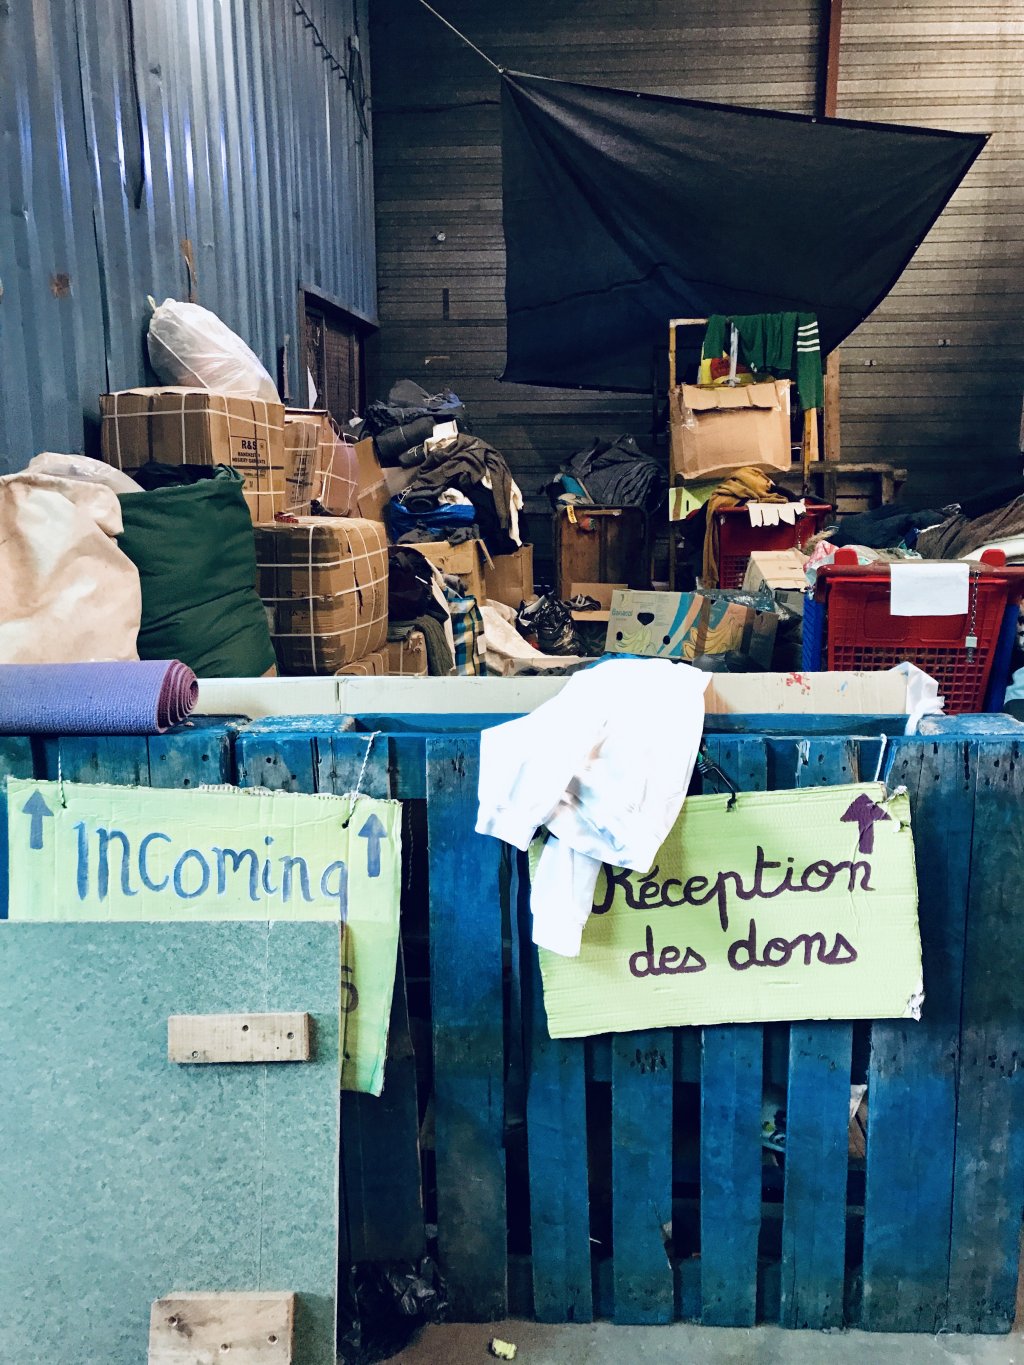 An image from one of the warehouses in Calais | Photo: Courtesy of Sol Escobar